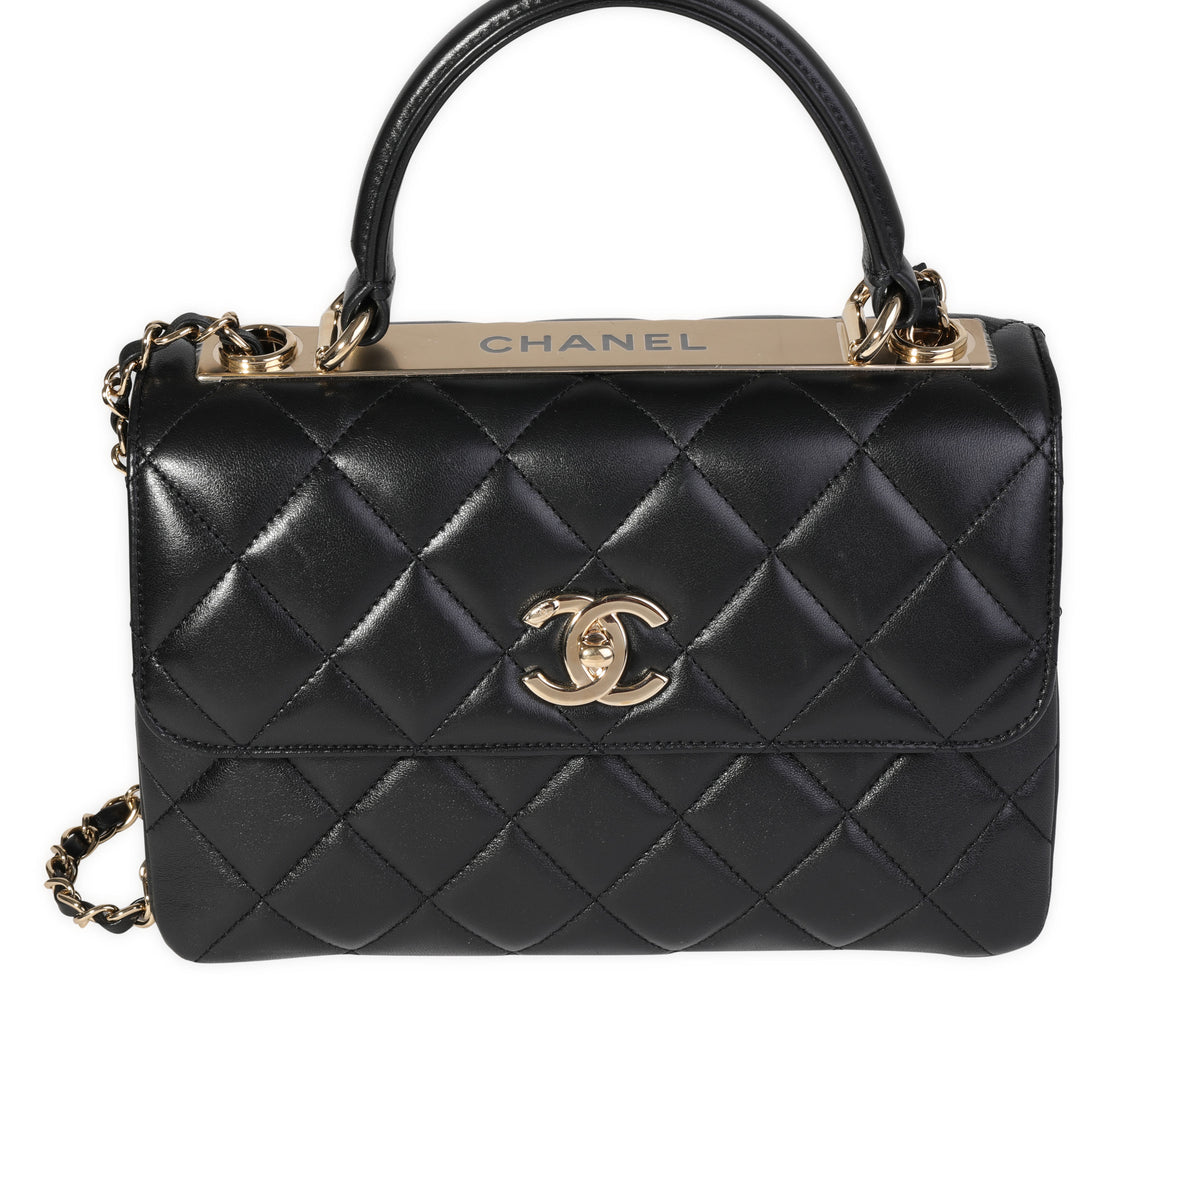 Chanel Black Quilted Lambskin Small Trendy Top Handle Flap Bag, myGemma, GB